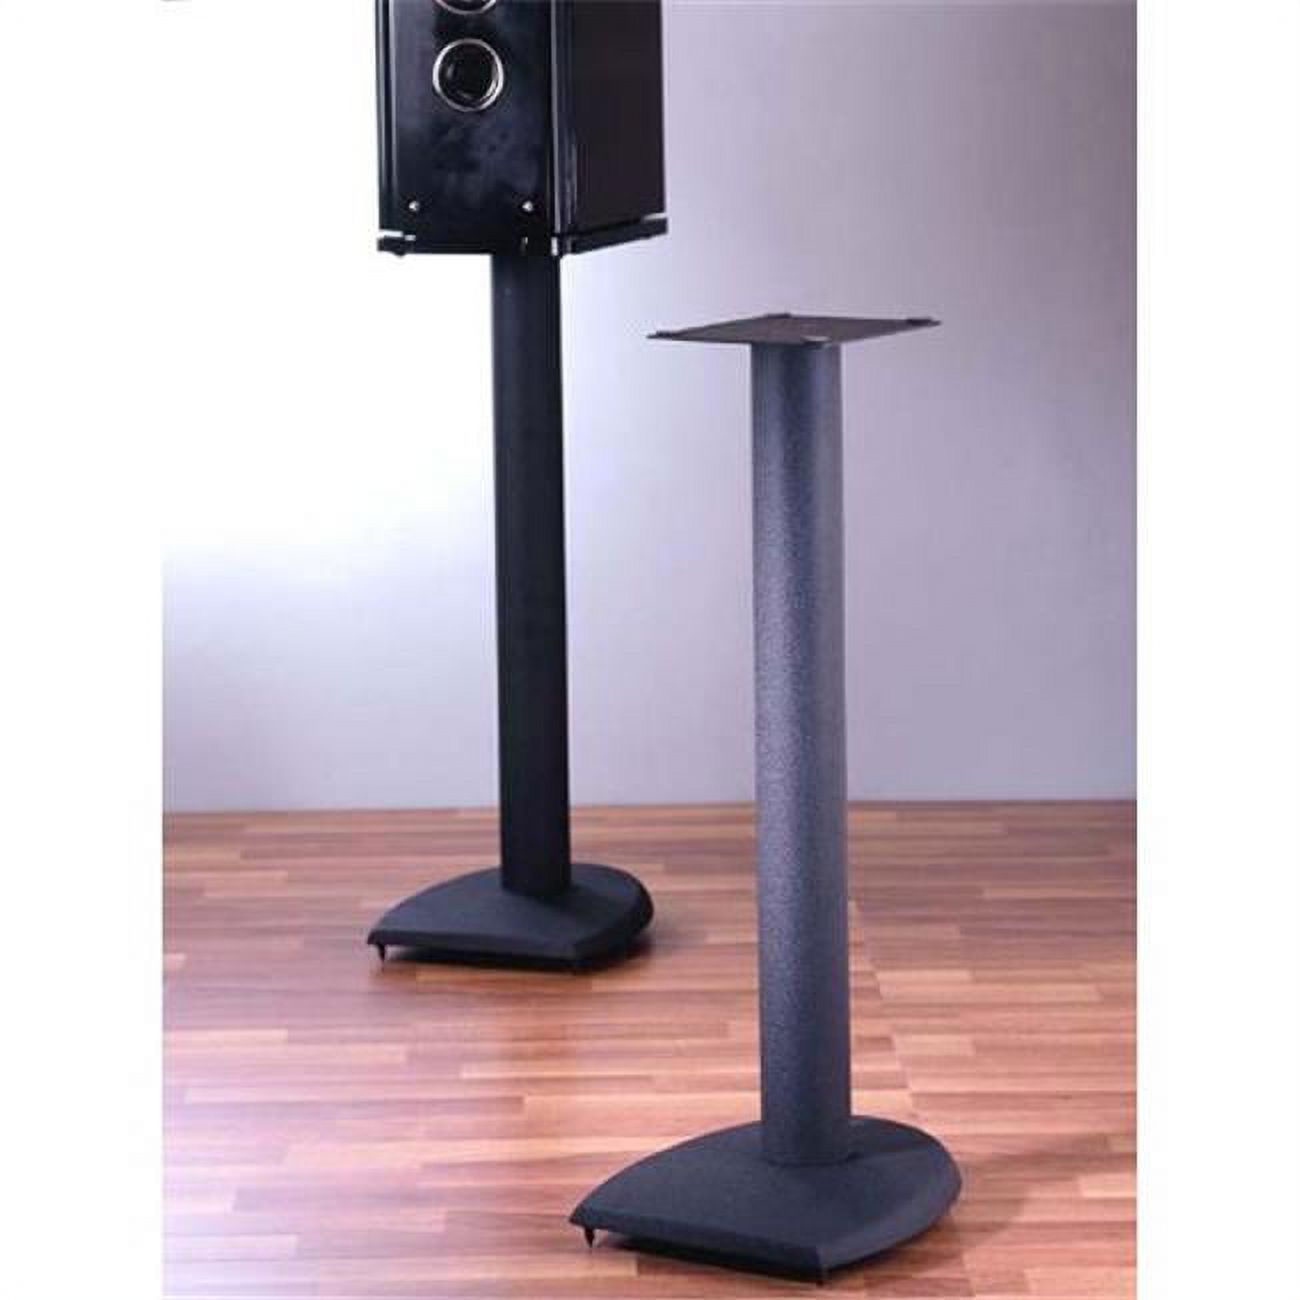 VTI Manufacturing DF19 19 in. H- Iron Center Channel Speaker Stand - Black - image 1 of 1